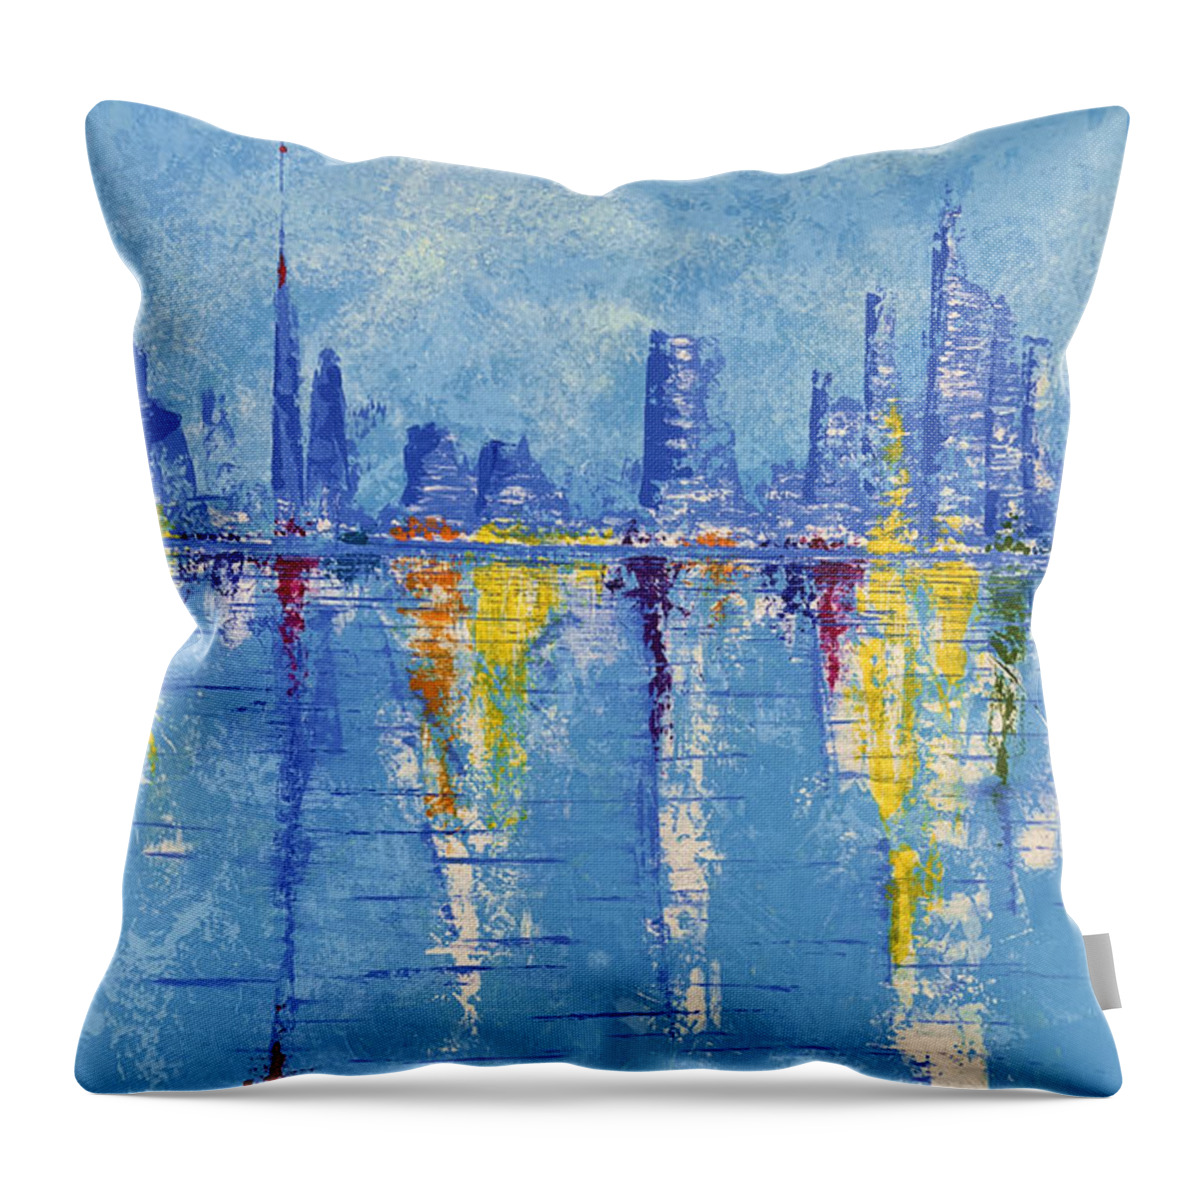 Abstract Throw Pillow featuring the painting Rainbow City by Tes Scholtz